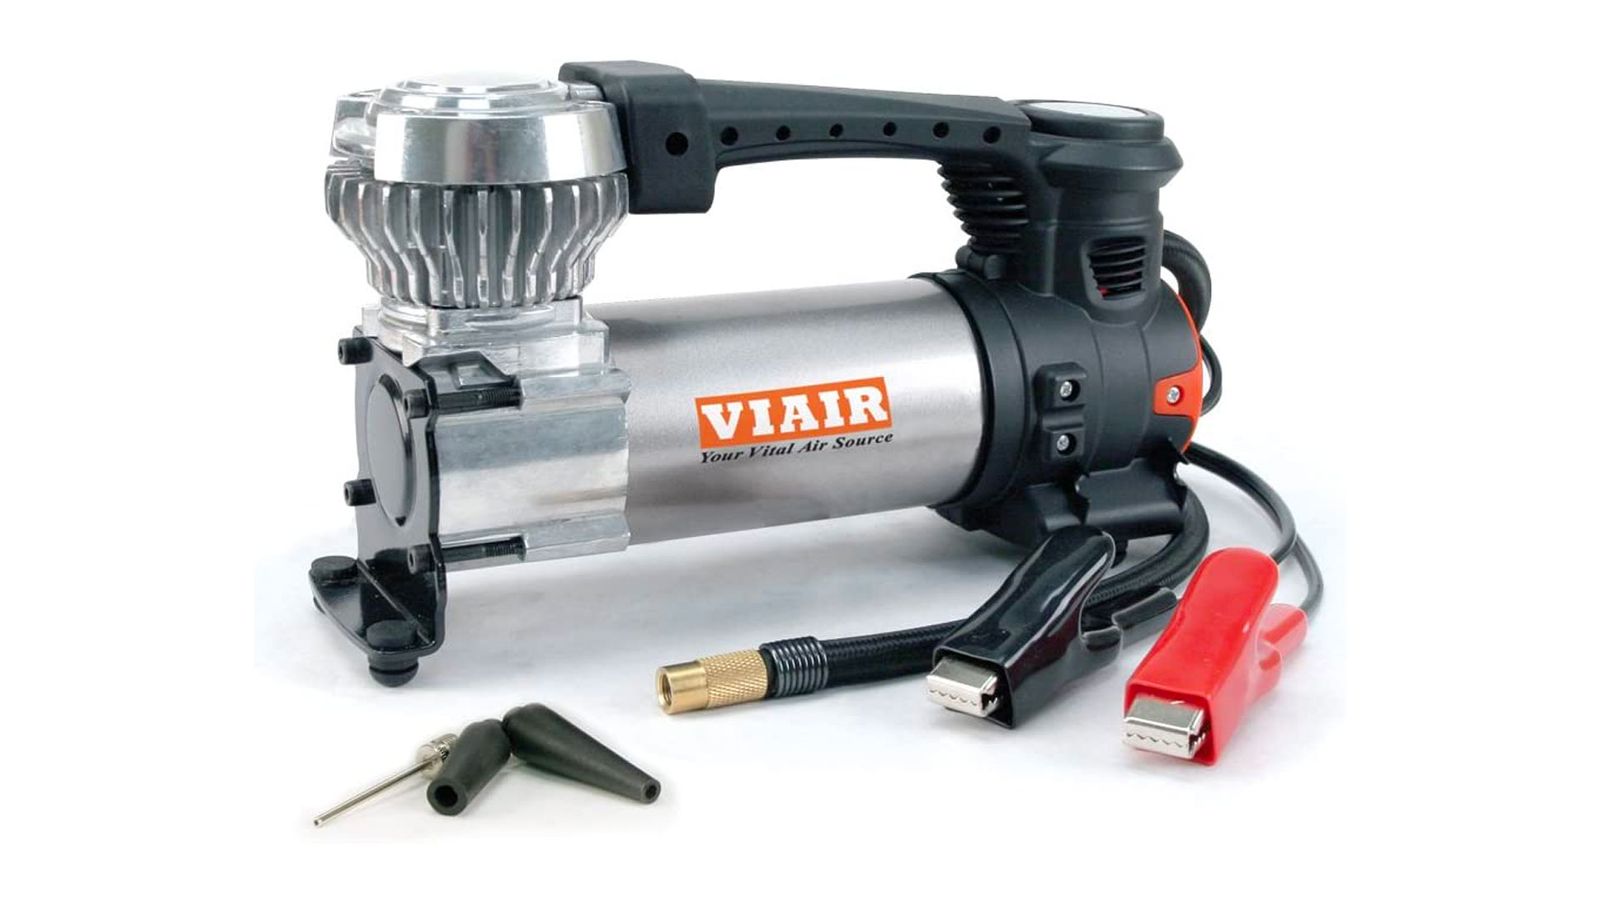 Viair 00088 88P product image of a silver and black air compressor with orange Viair branding.